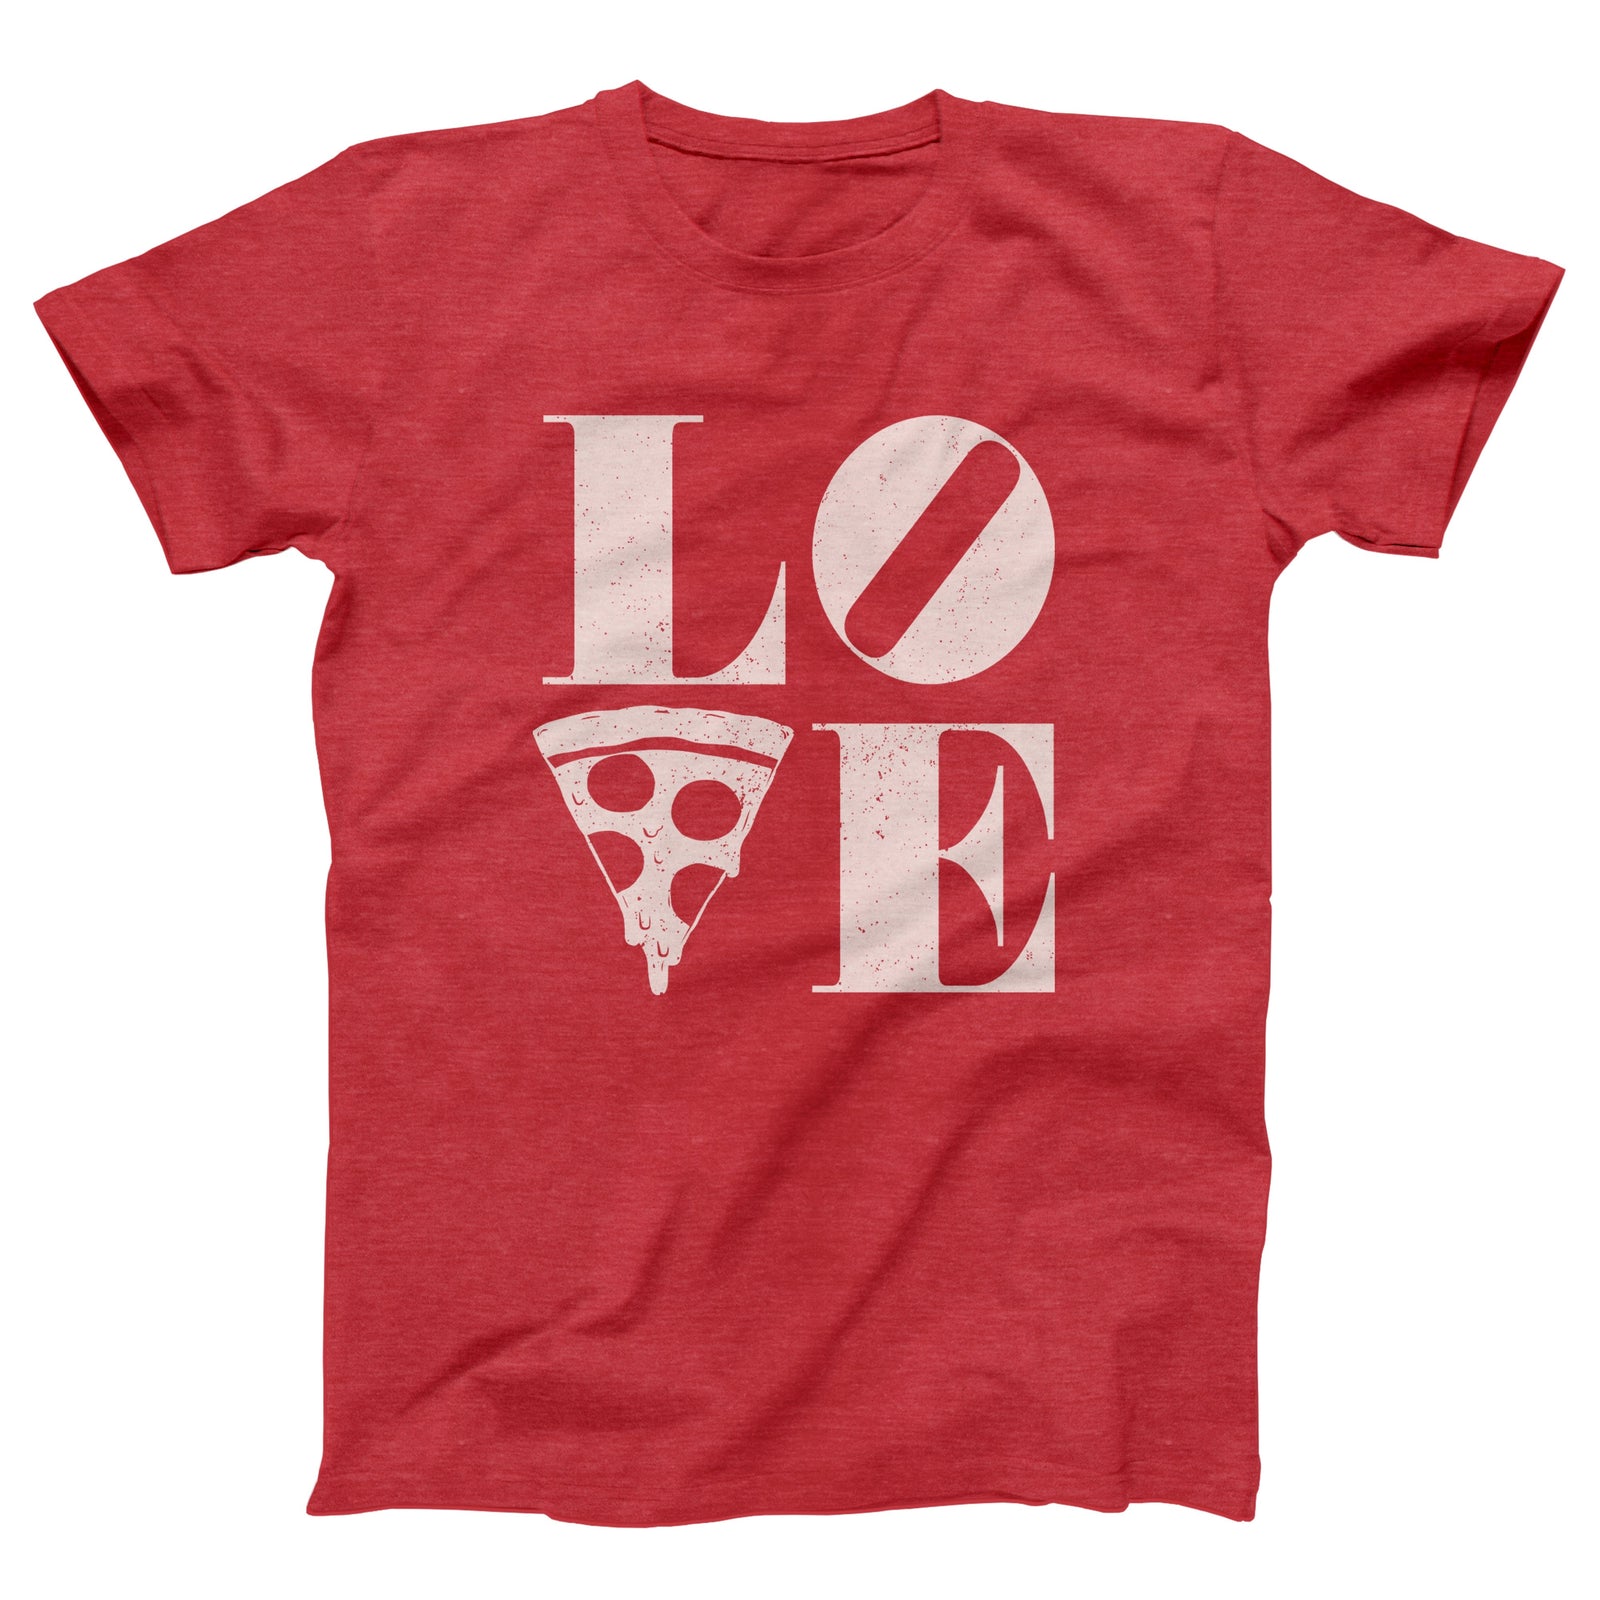 //cdn.shopify.com/s/files/1/0274/2488/2766/products/pizza-love-menunisex-t-shirt-545184_5000x.jpg?v=1622708124 5000w,
    //cdn.shopify.com/s/files/1/0274/2488/2766/products/pizza-love-menunisex-t-shirt-545184_4500x.jpg?v=1622708124 4500w,
    //cdn.shopify.com/s/files/1/0274/2488/2766/products/pizza-love-menunisex-t-shirt-545184_4000x.jpg?v=1622708124 4000w,
    //cdn.shopify.com/s/files/1/0274/2488/2766/products/pizza-love-menunisex-t-shirt-545184_3500x.jpg?v=1622708124 3500w,
    //cdn.shopify.com/s/files/1/0274/2488/2766/products/pizza-love-menunisex-t-shirt-545184_3000x.jpg?v=1622708124 3000w,
    //cdn.shopify.com/s/files/1/0274/2488/2766/products/pizza-love-menunisex-t-shirt-545184_2500x.jpg?v=1622708124 2500w,
    //cdn.shopify.com/s/files/1/0274/2488/2766/products/pizza-love-menunisex-t-shirt-545184_2000x.jpg?v=1622708124 2000w,
    //cdn.shopify.com/s/files/1/0274/2488/2766/products/pizza-love-menunisex-t-shirt-545184_1800x.jpg?v=1622708124 1800w,
    //cdn.shopify.com/s/files/1/0274/2488/2766/products/pizza-love-menunisex-t-shirt-545184_1600x.jpg?v=1622708124 1600w,
    //cdn.shopify.com/s/files/1/0274/2488/2766/products/pizza-love-menunisex-t-shirt-545184_1400x.jpg?v=1622708124 1400w,
    //cdn.shopify.com/s/files/1/0274/2488/2766/products/pizza-love-menunisex-t-shirt-545184_1200x.jpg?v=1622708124 1200w,
    //cdn.shopify.com/s/files/1/0274/2488/2766/products/pizza-love-menunisex-t-shirt-545184_1000x.jpg?v=1622708124 1000w,
    //cdn.shopify.com/s/files/1/0274/2488/2766/products/pizza-love-menunisex-t-shirt-545184_800x.jpg?v=1622708124 800w,
    //cdn.shopify.com/s/files/1/0274/2488/2766/products/pizza-love-menunisex-t-shirt-545184_600x.jpg?v=1622708124 600w,
    //cdn.shopify.com/s/files/1/0274/2488/2766/products/pizza-love-menunisex-t-shirt-545184_400x.jpg?v=1622708124 400w,
    //cdn.shopify.com/s/files/1/0274/2488/2766/products/pizza-love-menunisex-t-shirt-545184_200x.jpg?v=1622708124 200w